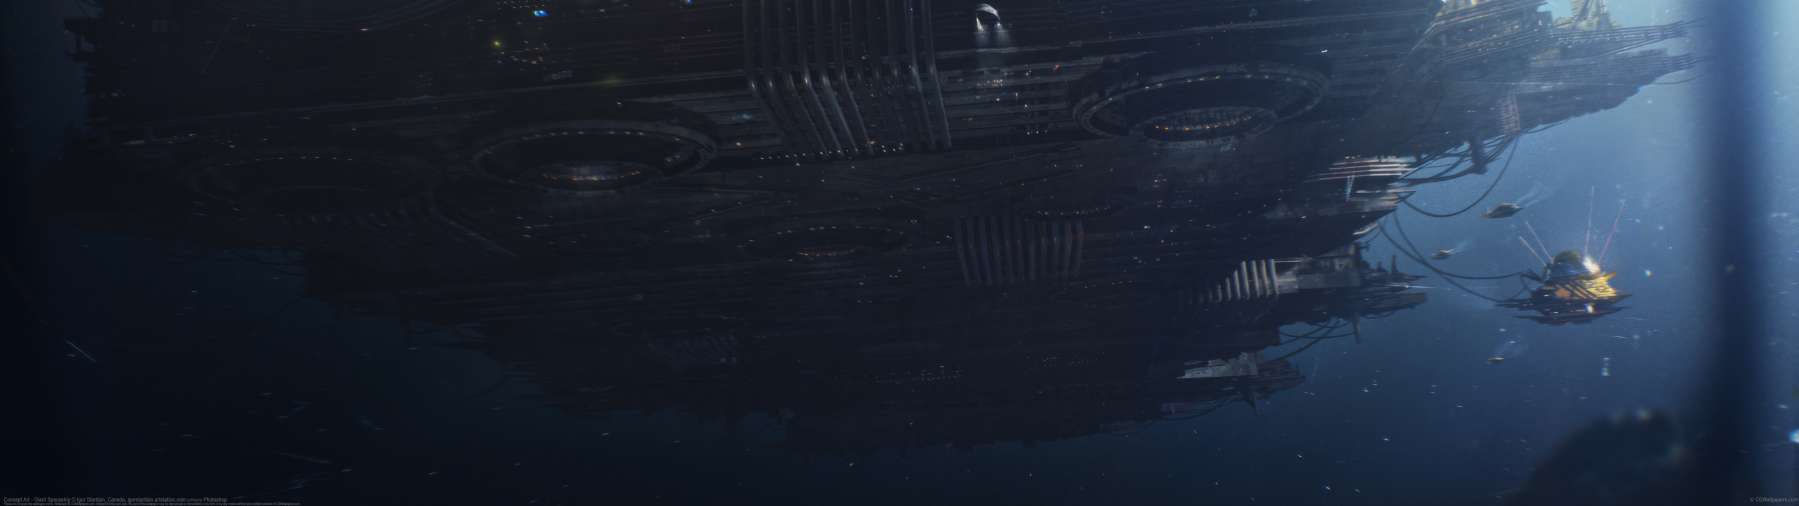 Concept Art - Giant Spaceship ultrawide achtergrond